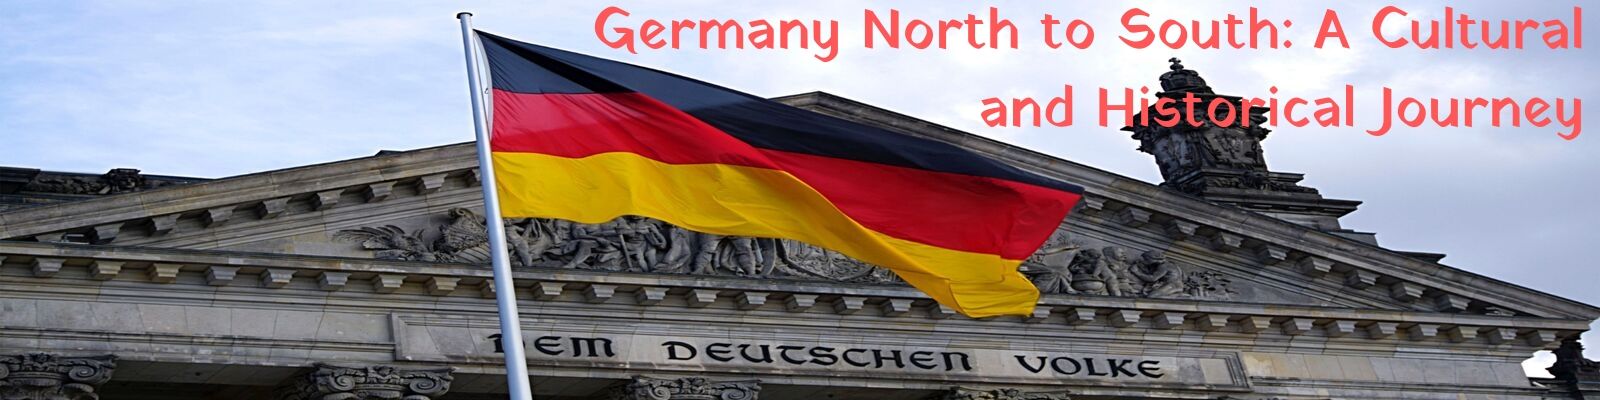 Germany North to South